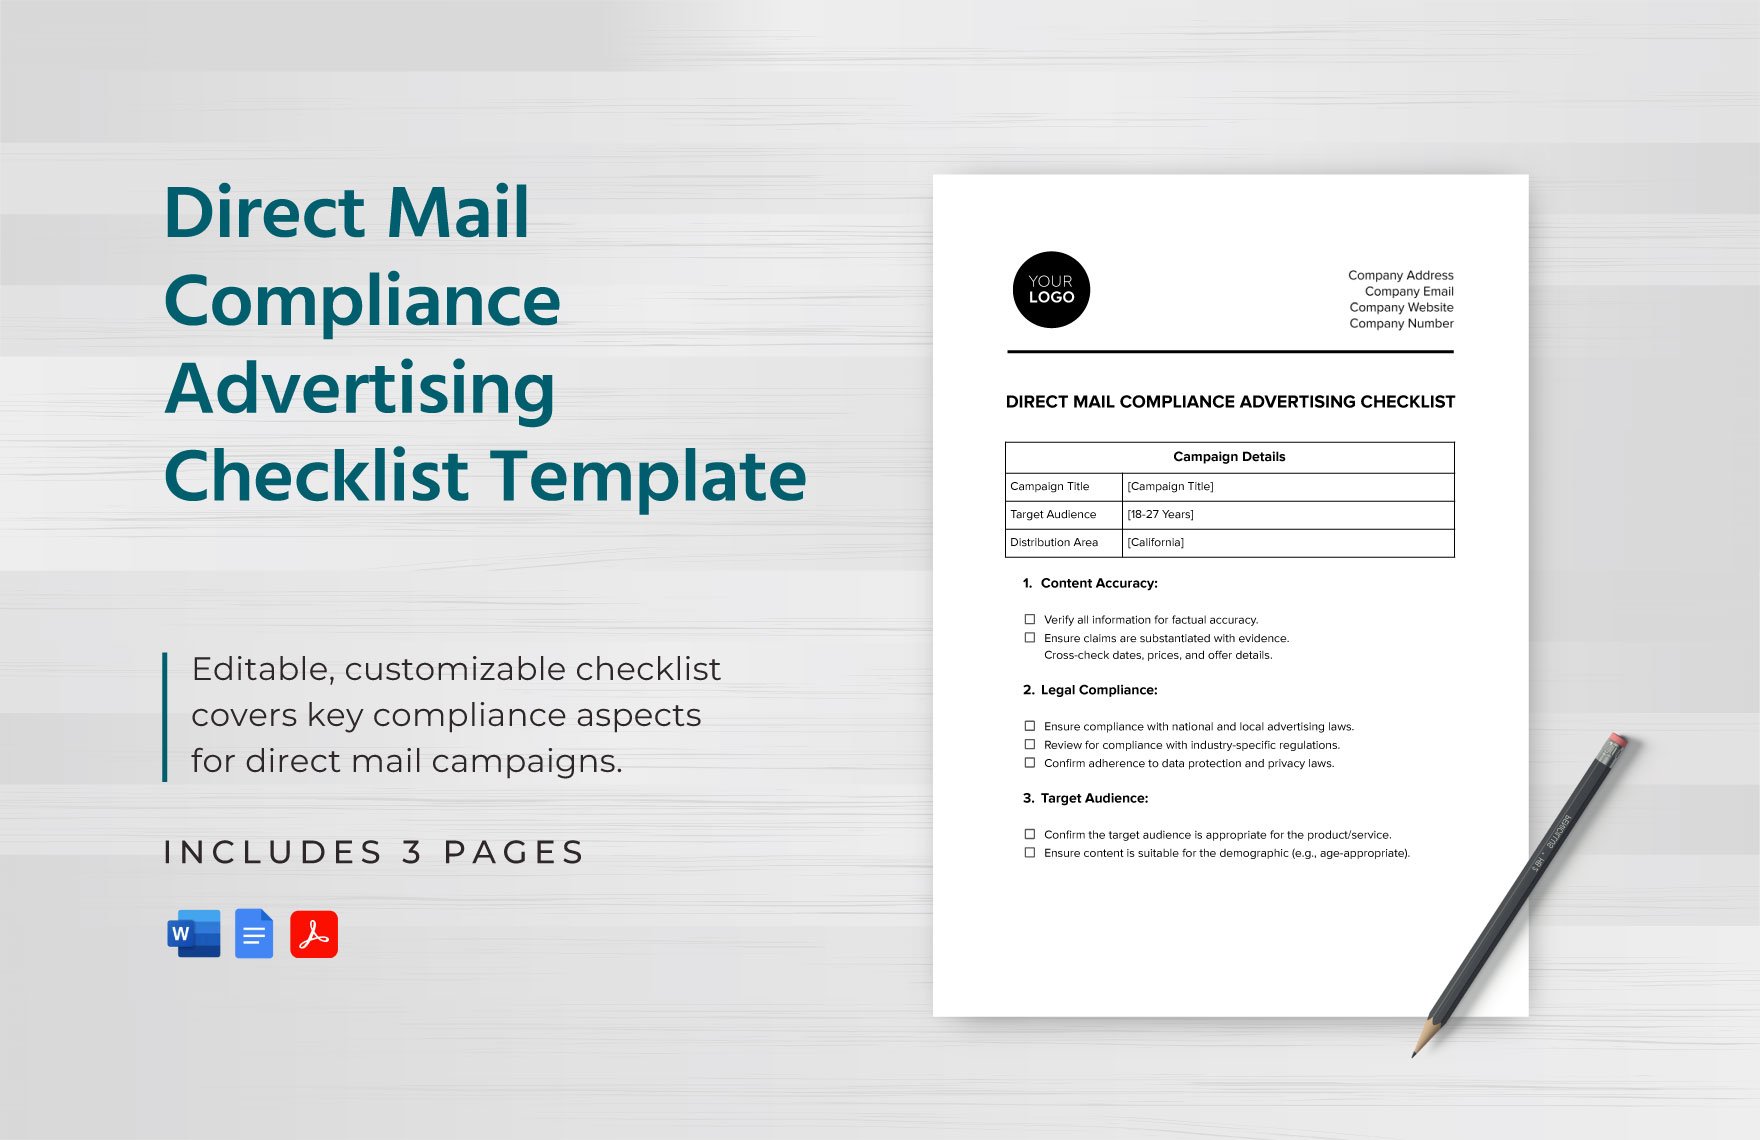 Direct Mail Compliance Advertising Checklist Template in Word, Google Docs, PDF